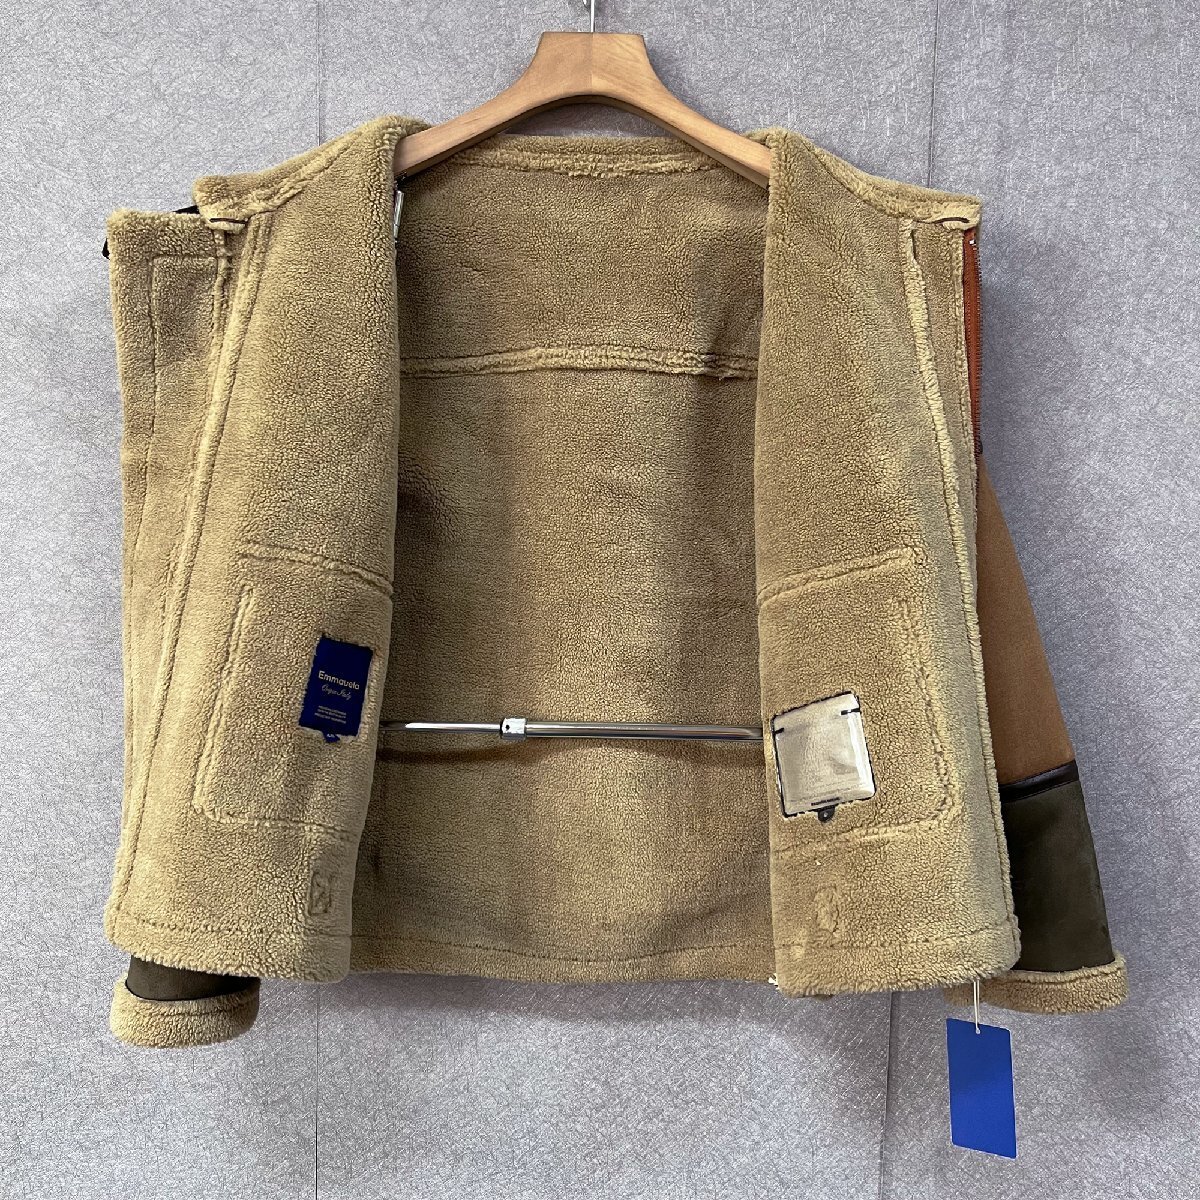  high class * leather jacket regular price 13 ten thousand *Emmauela* Italy * milano departure * fine quality sheep leather sheepskin reverse side nappy -ply thickness protection against cold Rider's boma-XL/50